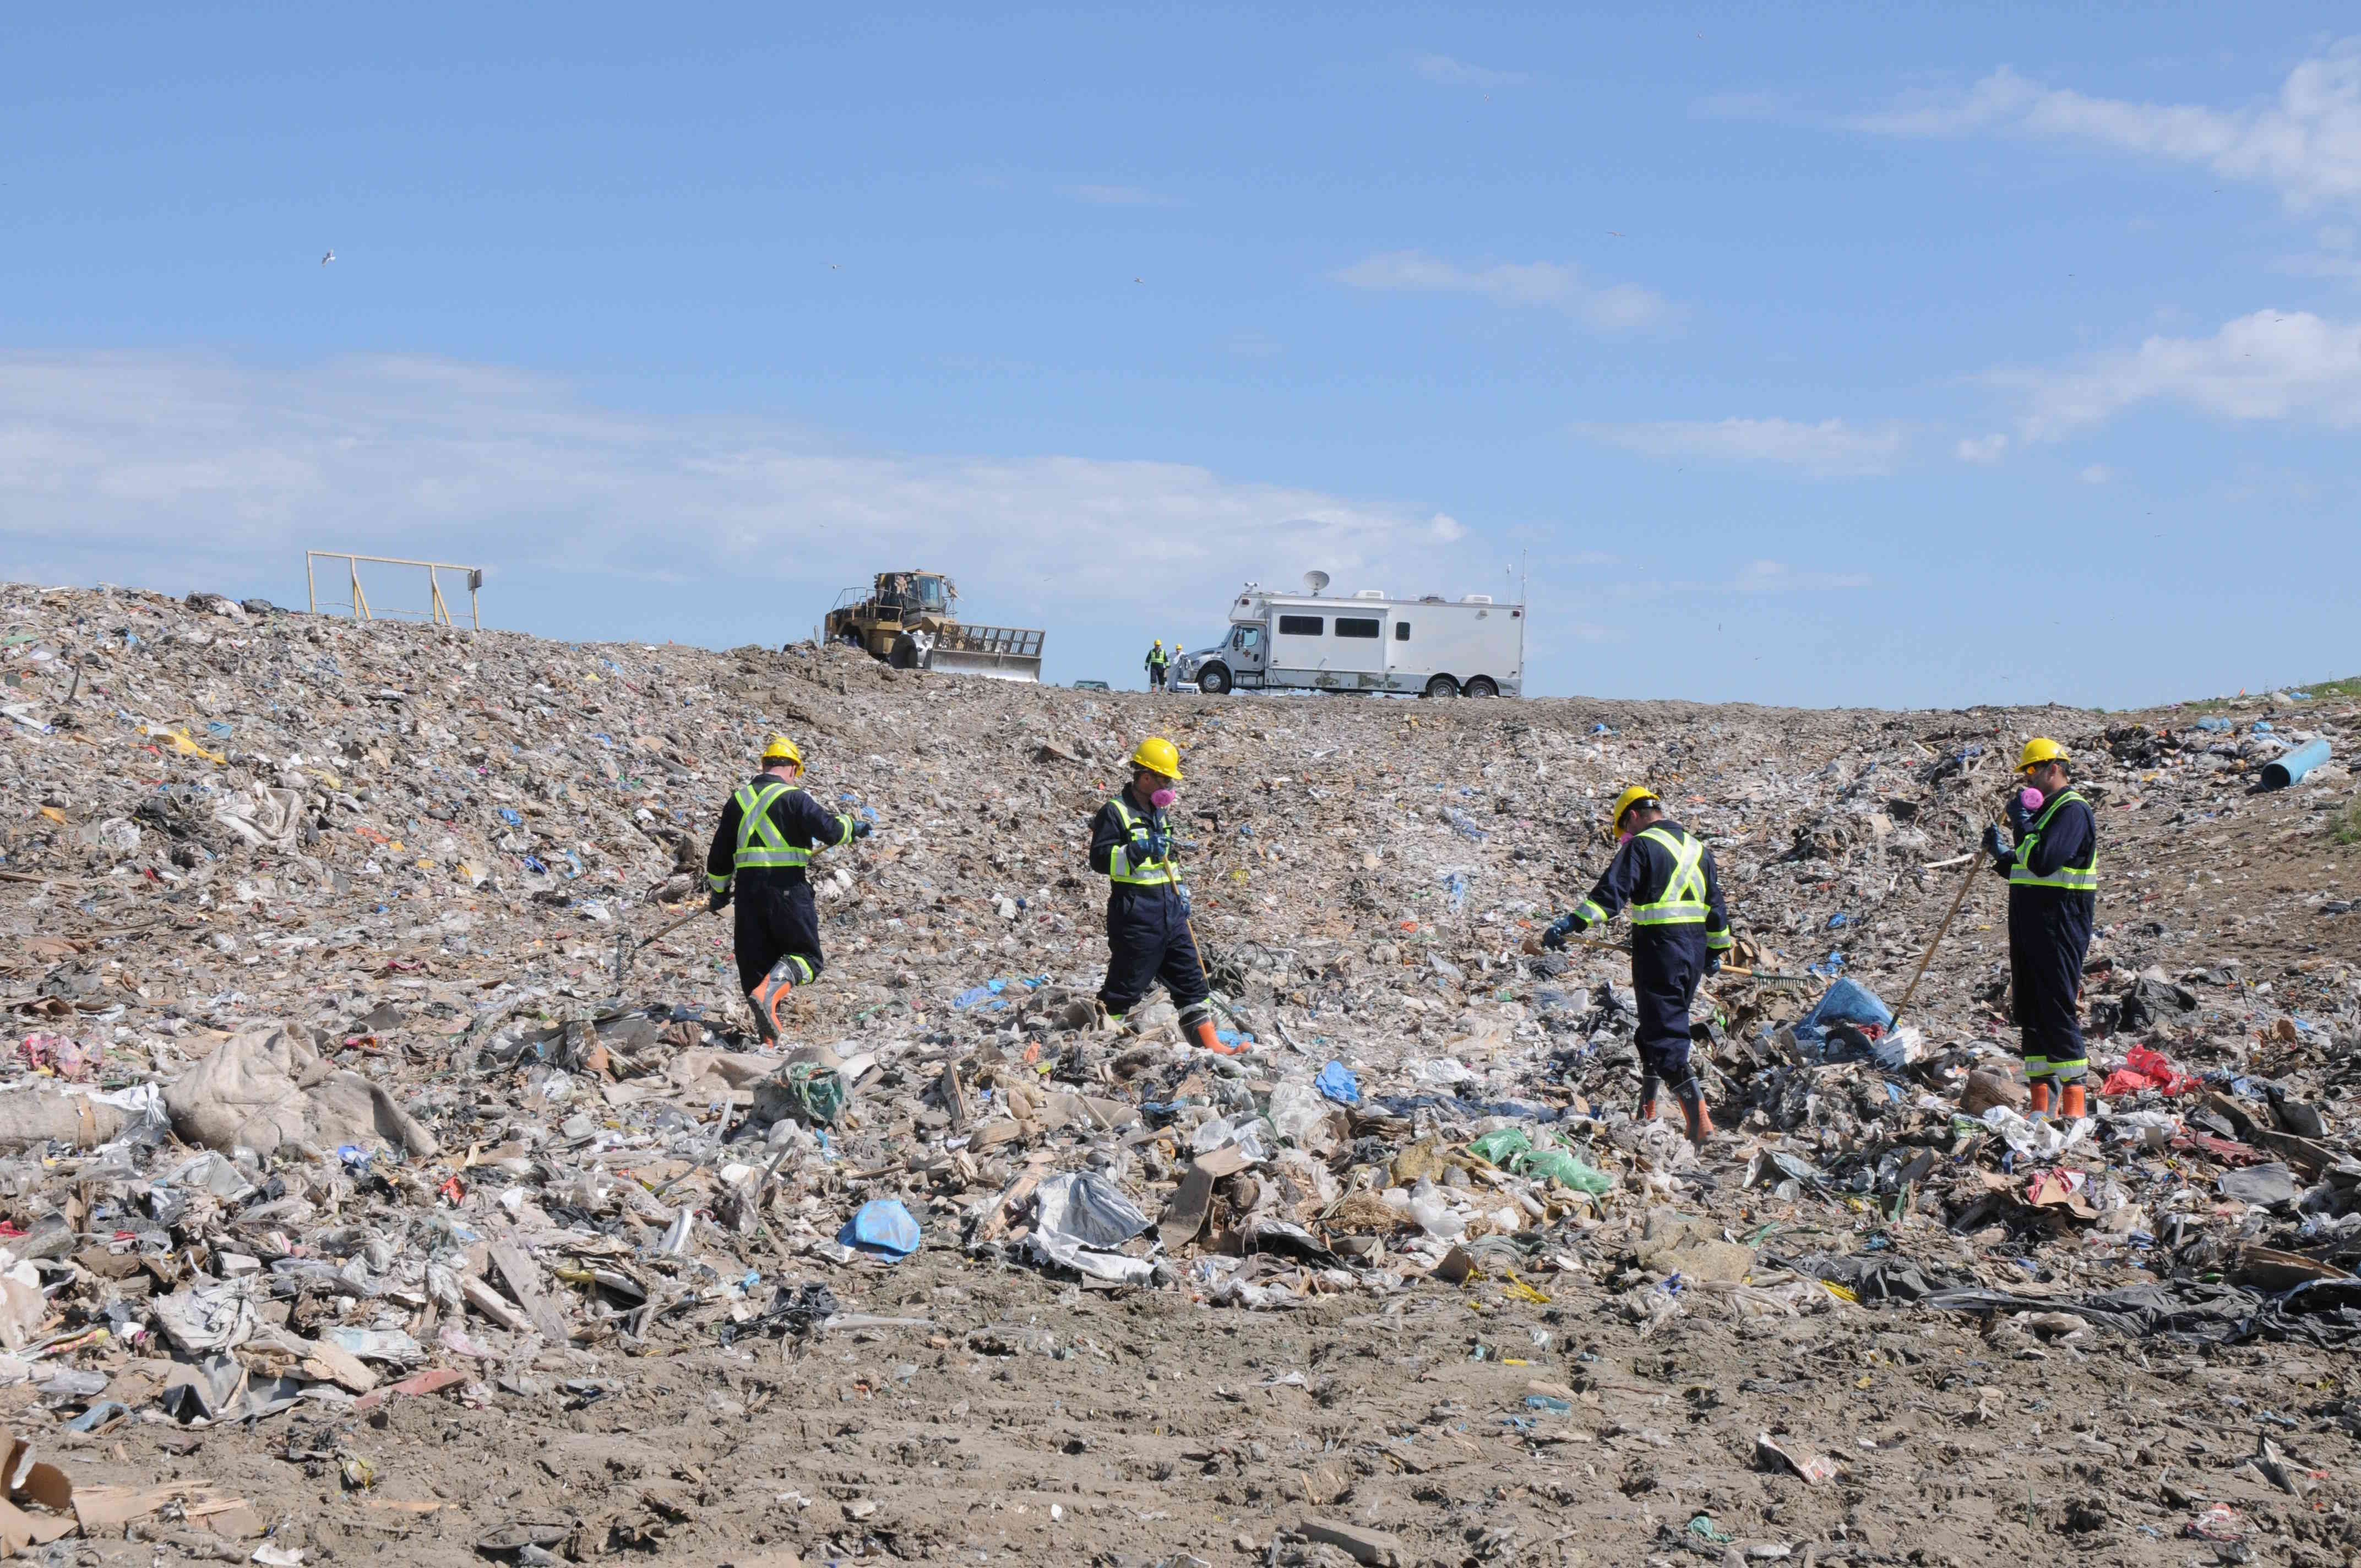 The command post and a loader are pictured in the background, with four workers searching through a landfill.